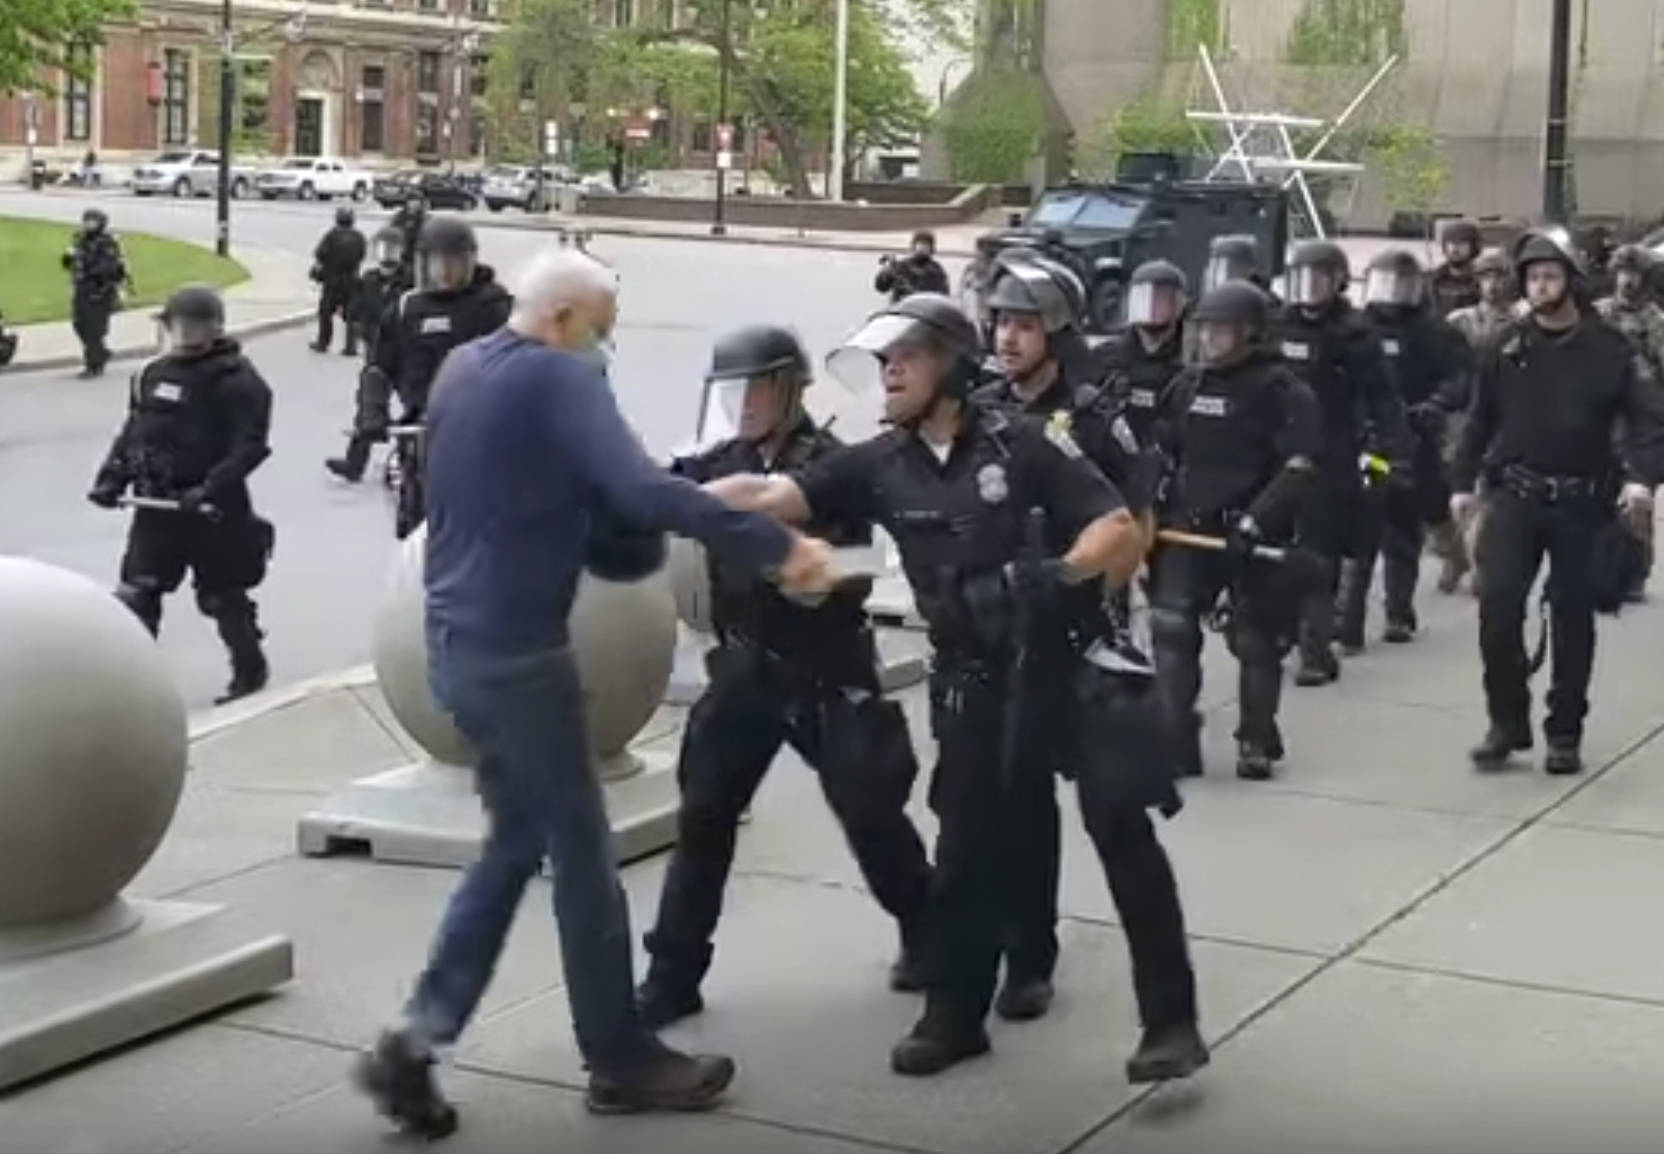 In this image from video provided by WBFO, a Buffalo police officer appears to shove a man who walked up to police Thursday, June 4, 2020, in Buffalo, N.Y. Video from WBFO shows the man appearing to hit his head on the pavement, with blood leaking out as officers walk past to clear Niagara Square. Buffalo police initially said in a statement that a person “was injured when he tripped & fell,” WIVB-TV reported, but Capt. Jeff Rinaldo later told the TV station that an internal affairs investigation was opened. Police Commissioner Byron Lockwood suspended two officers late Thursday, the mayor’s statement said. (Mike Desmond | WBFO via AP)